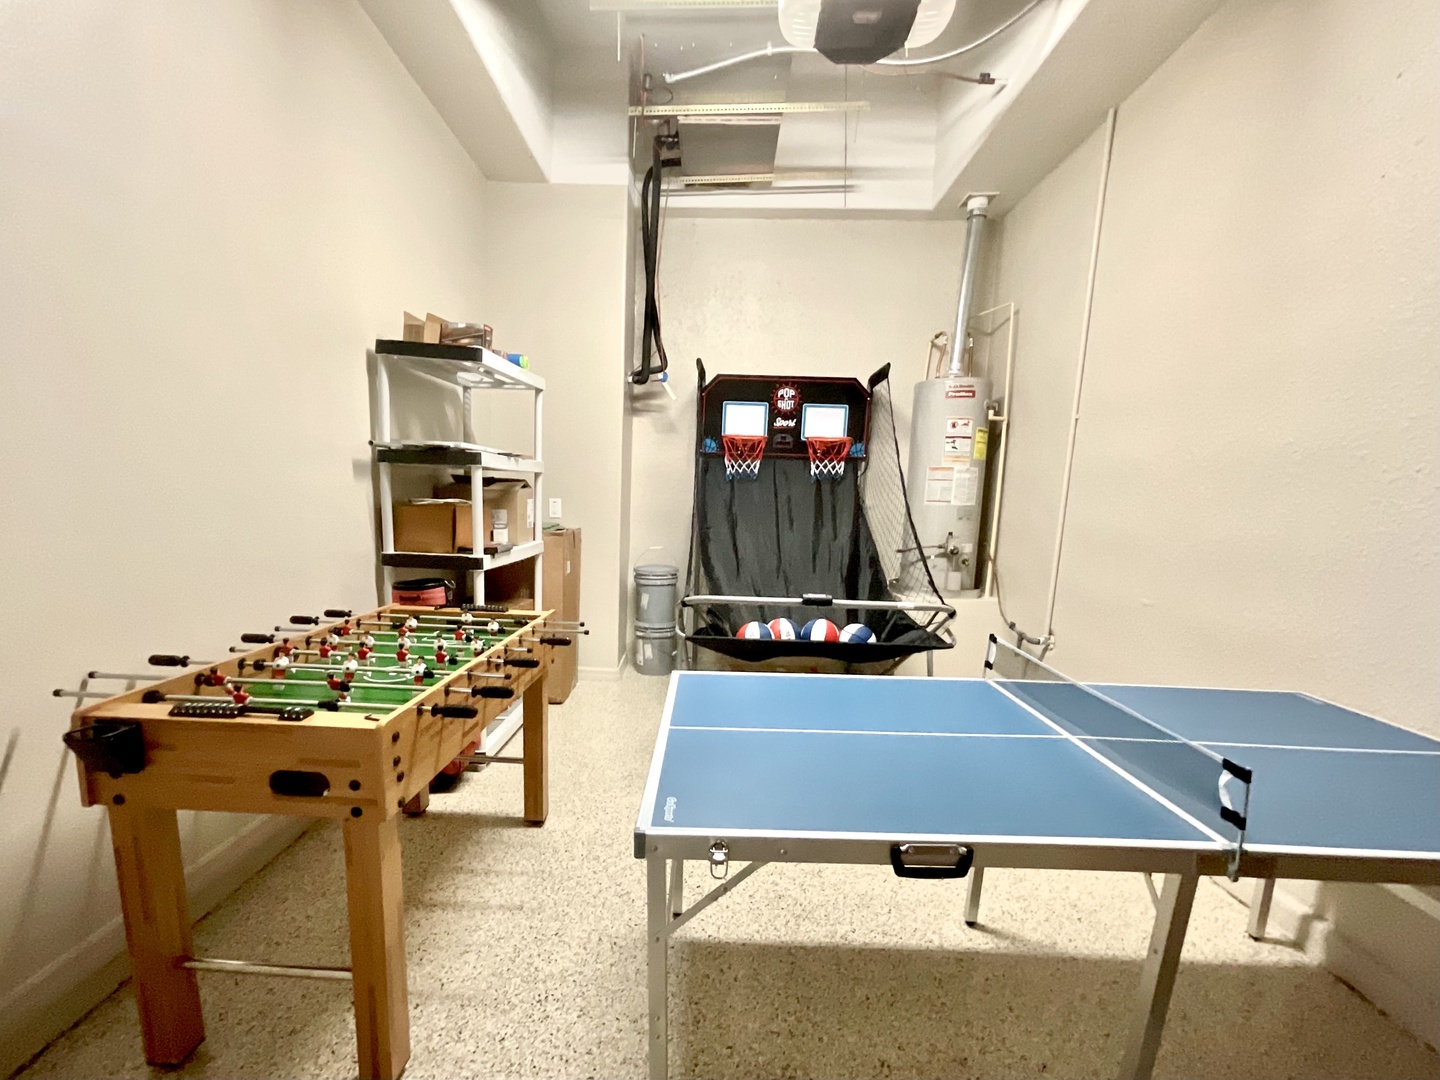 Ping pong table, Foosball, and other games for entertainment